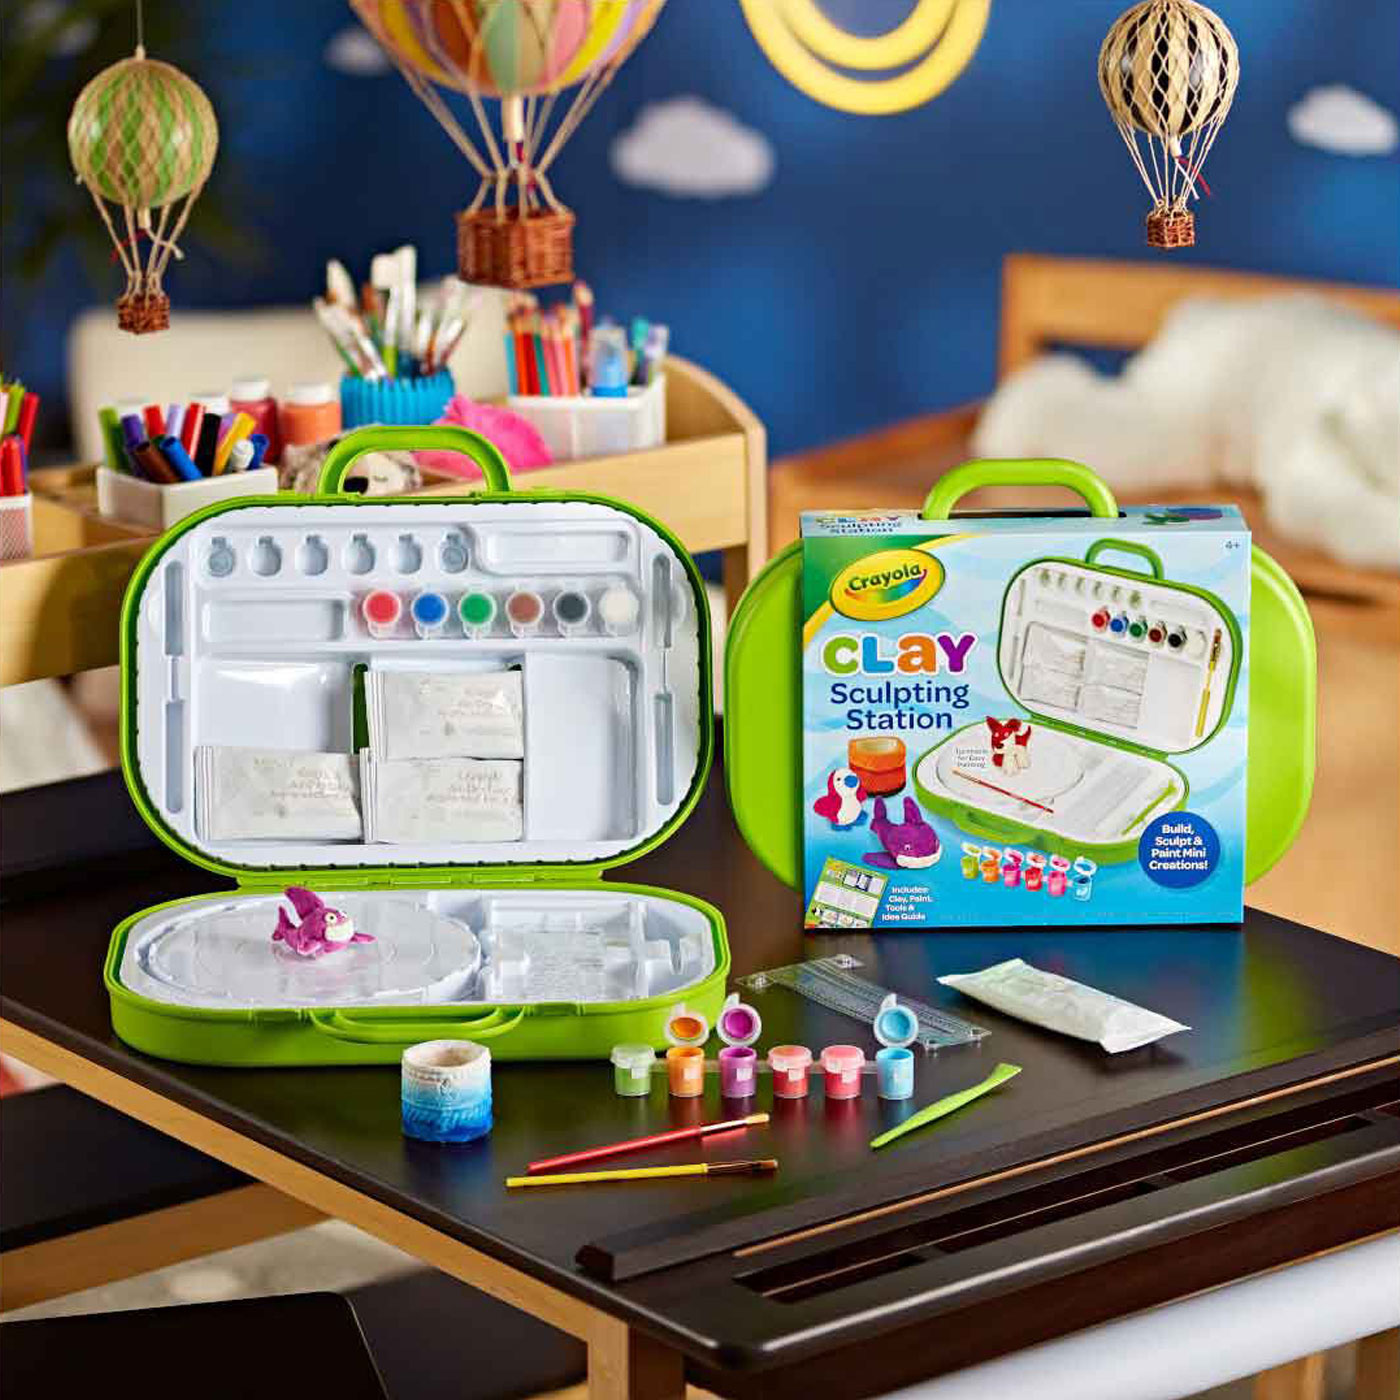 Crayola Clay Sculpting Station Pottery Wheel